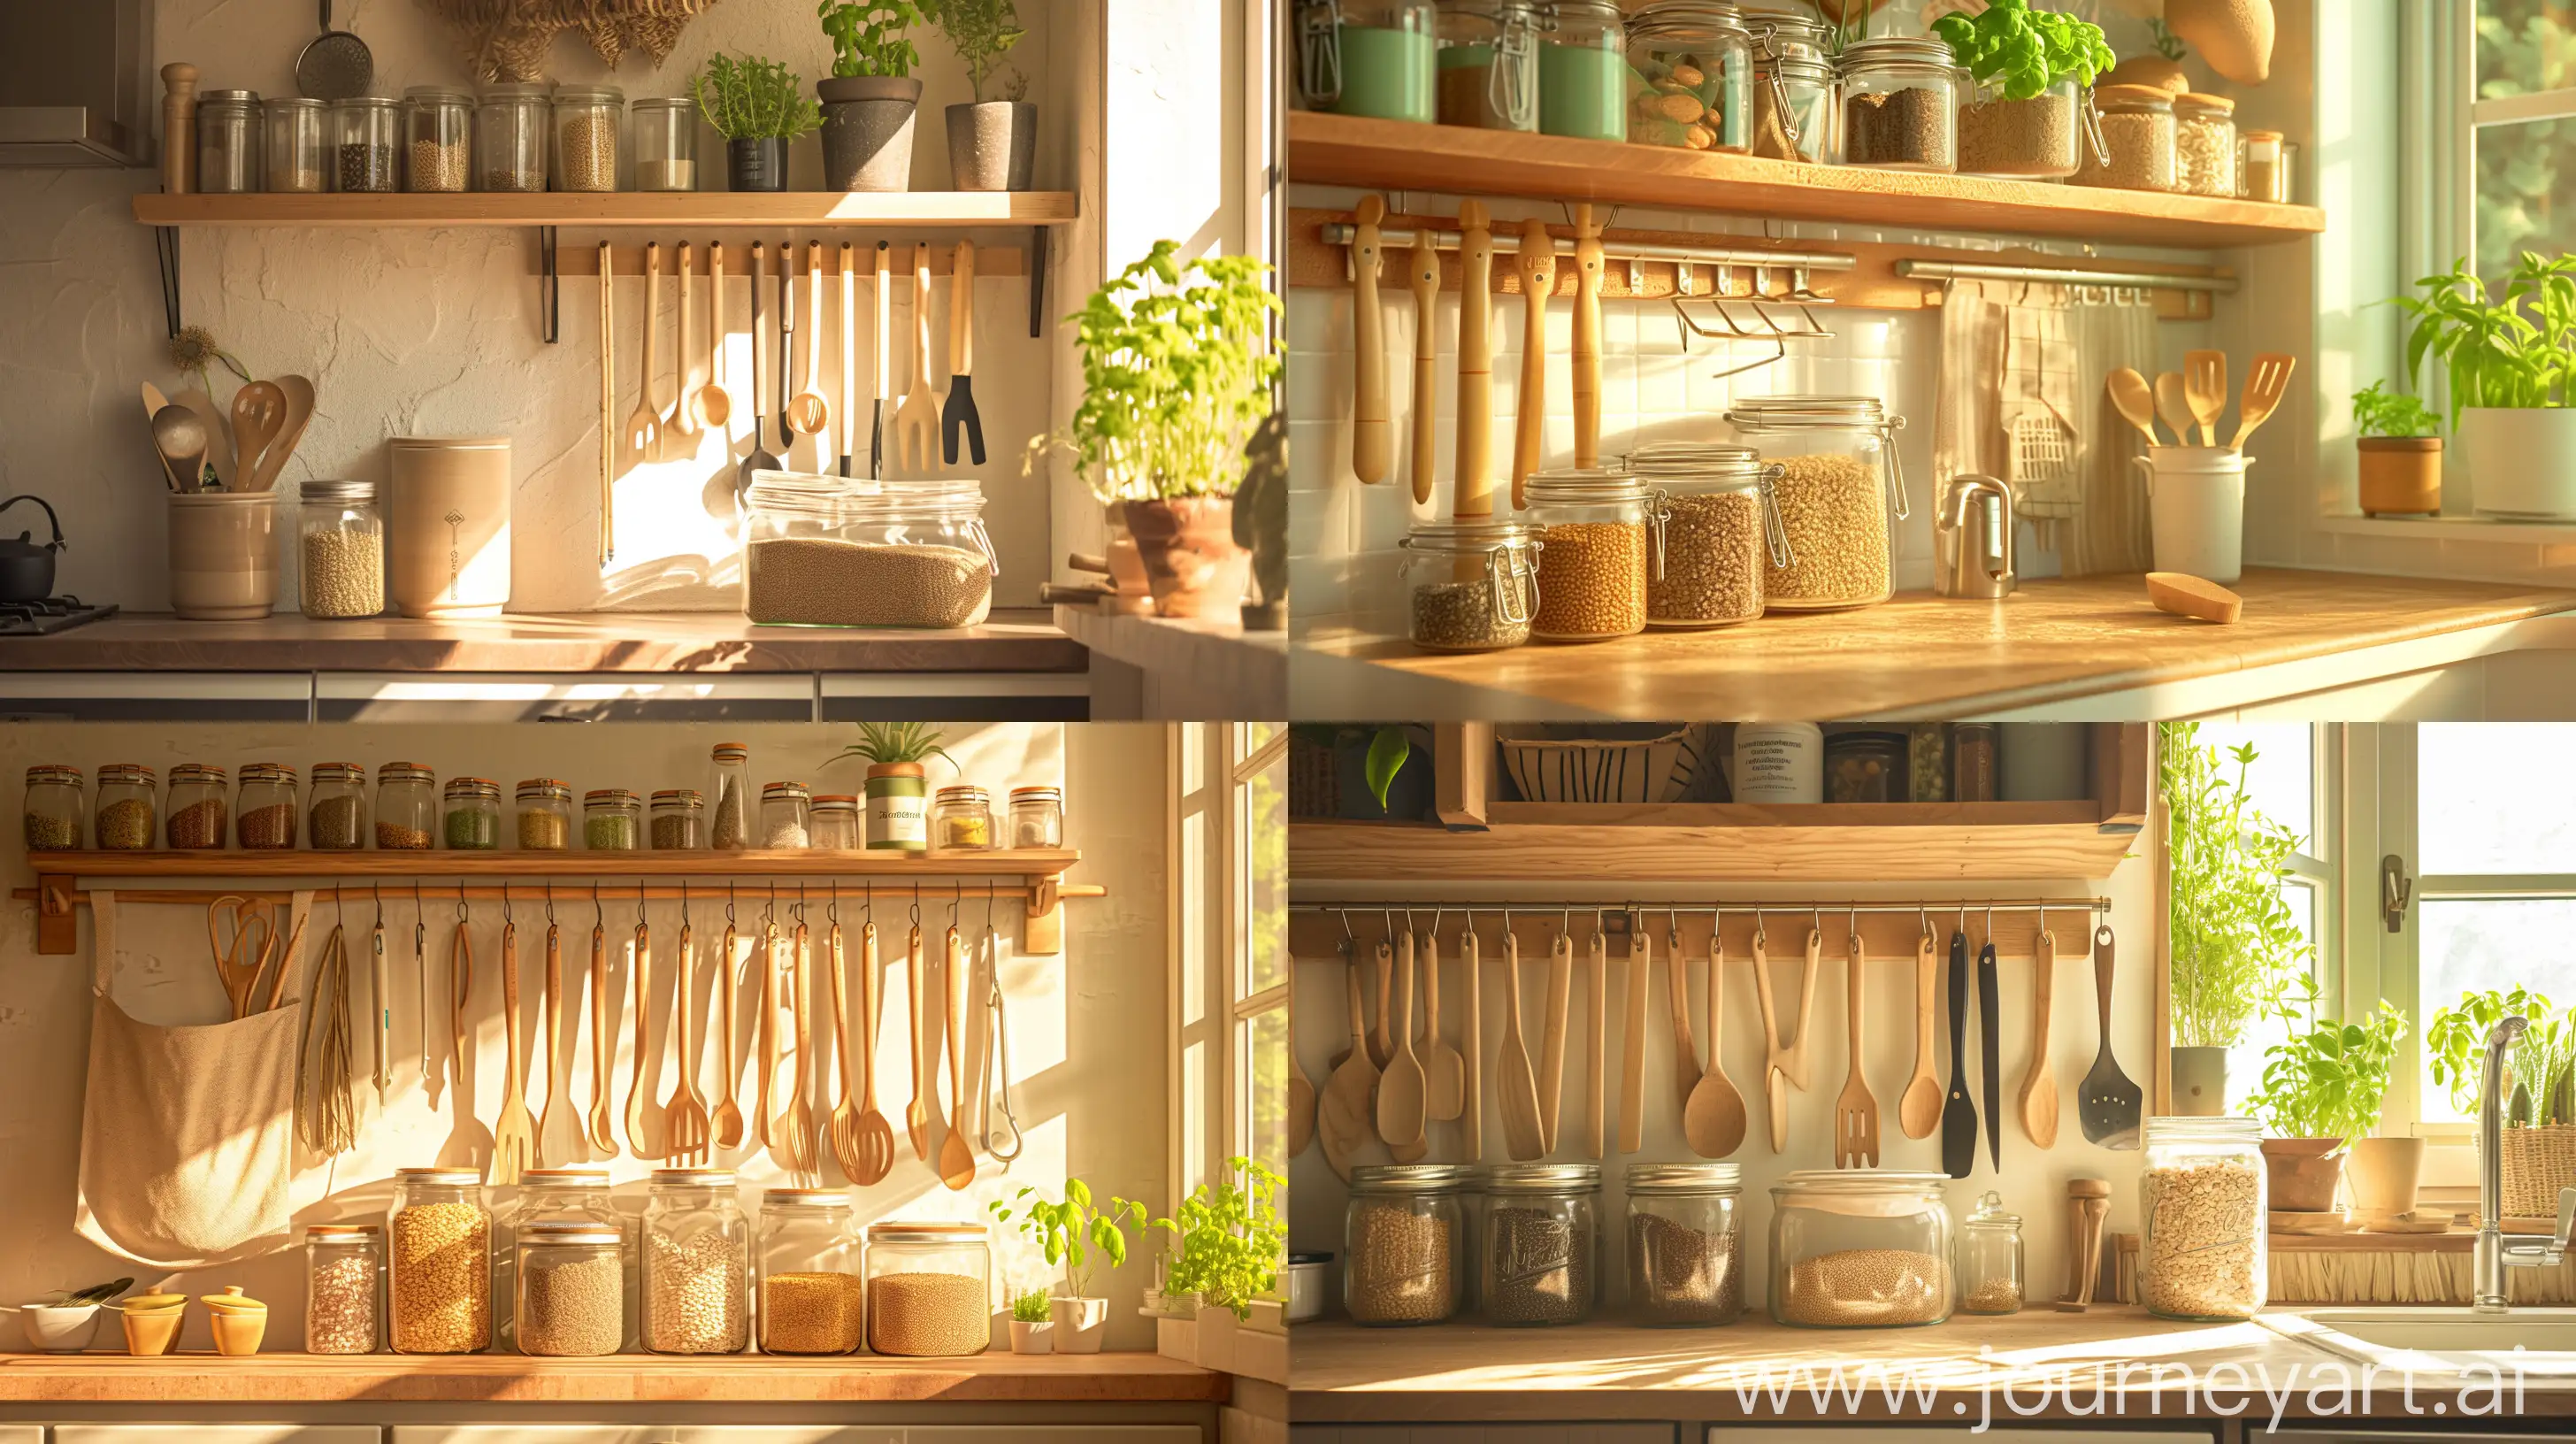 /imagine prompt: A zero-waste kitchen setup featuring bamboo utensils hanging on a reclaimed wood rack, mason jars filled with bulk grains and pulses neatly arranged on shelves, a compost bin under the countertop, natural light streaming in from a window with green plants on the sill, creating a warm and inviting atmosphere, Photography, DSLR camera with a 50mm prime lens, f/2.8 aperture, --ar 16:9 --niji